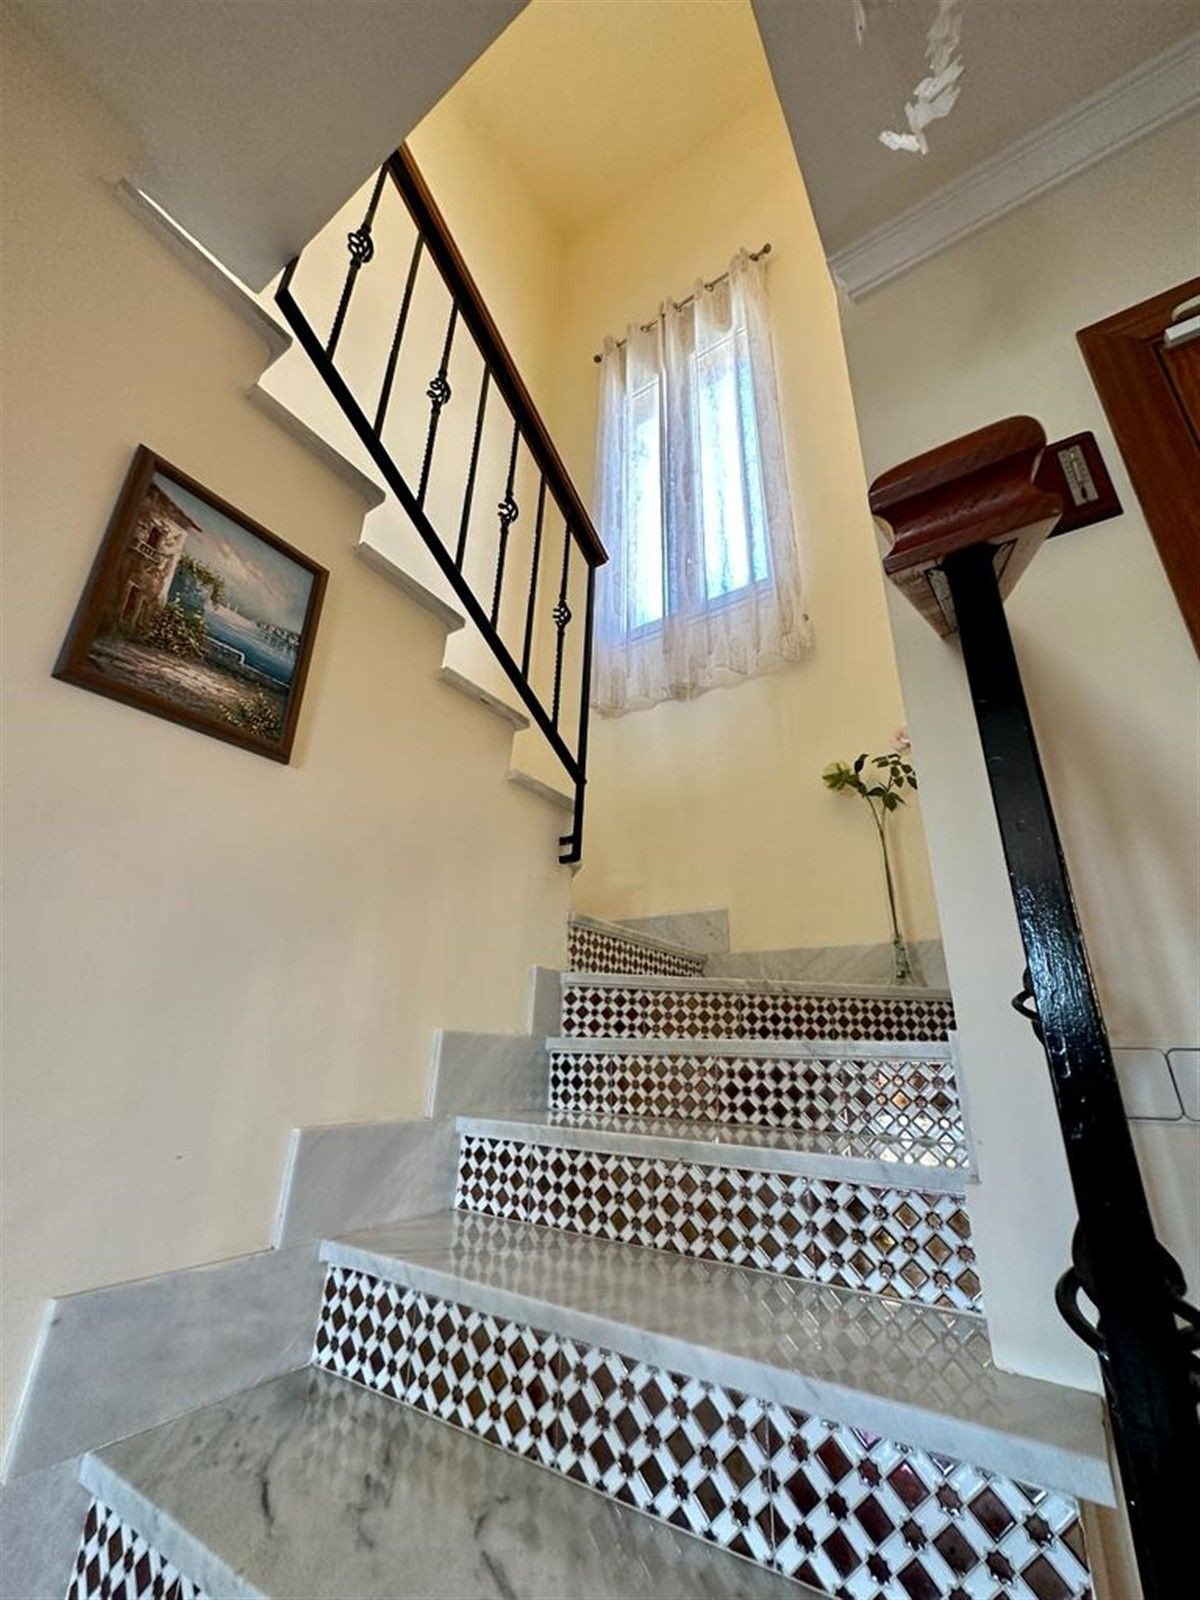 Townhouse for sale in Mijas 20